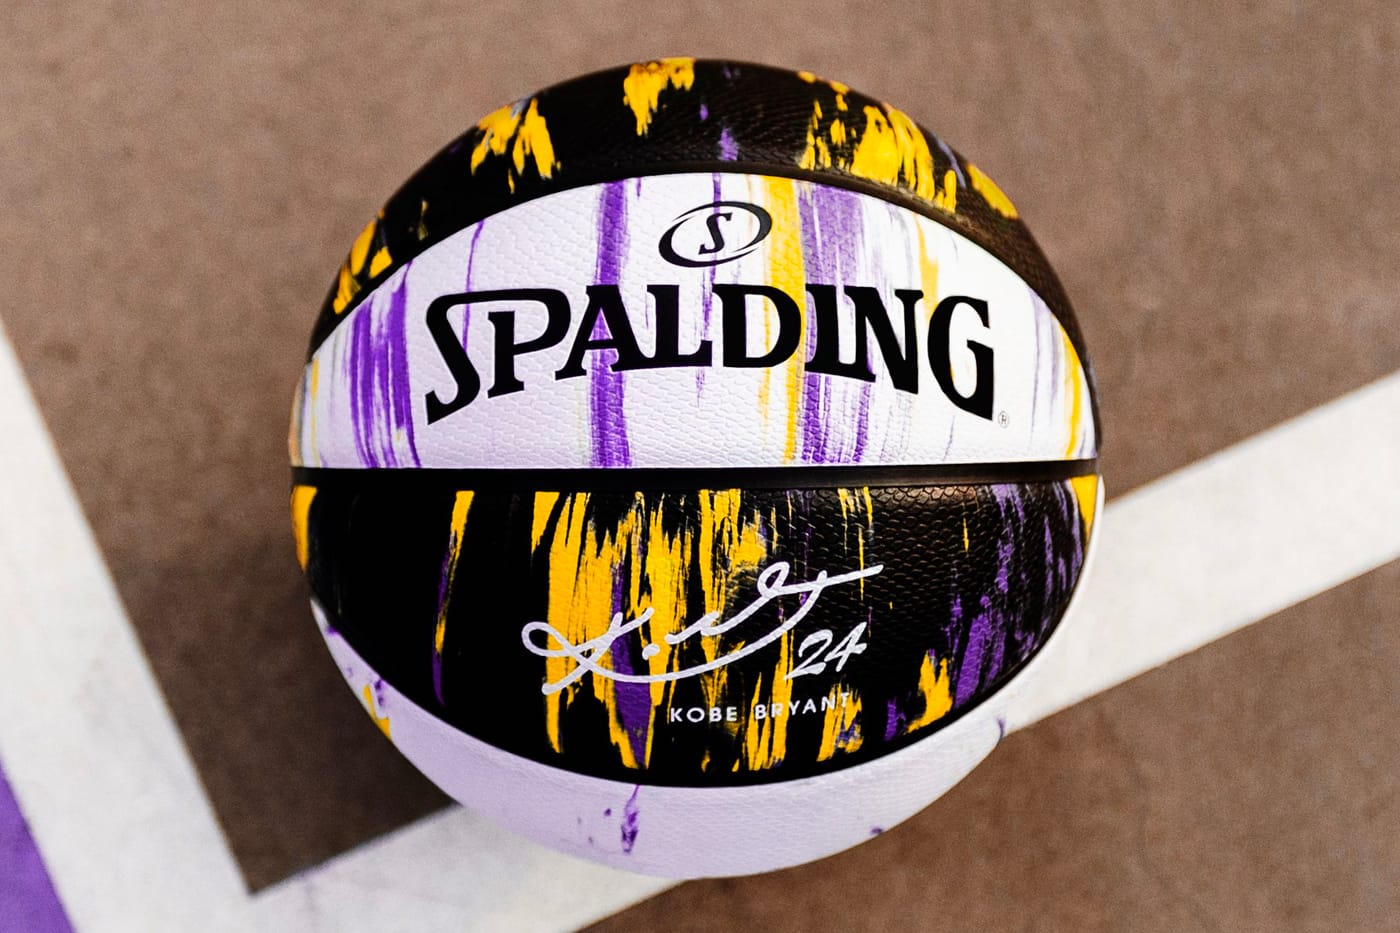 CONFIRMED SPALDING X KOBE BRYANT Marble Series Limited Edition Basketball 